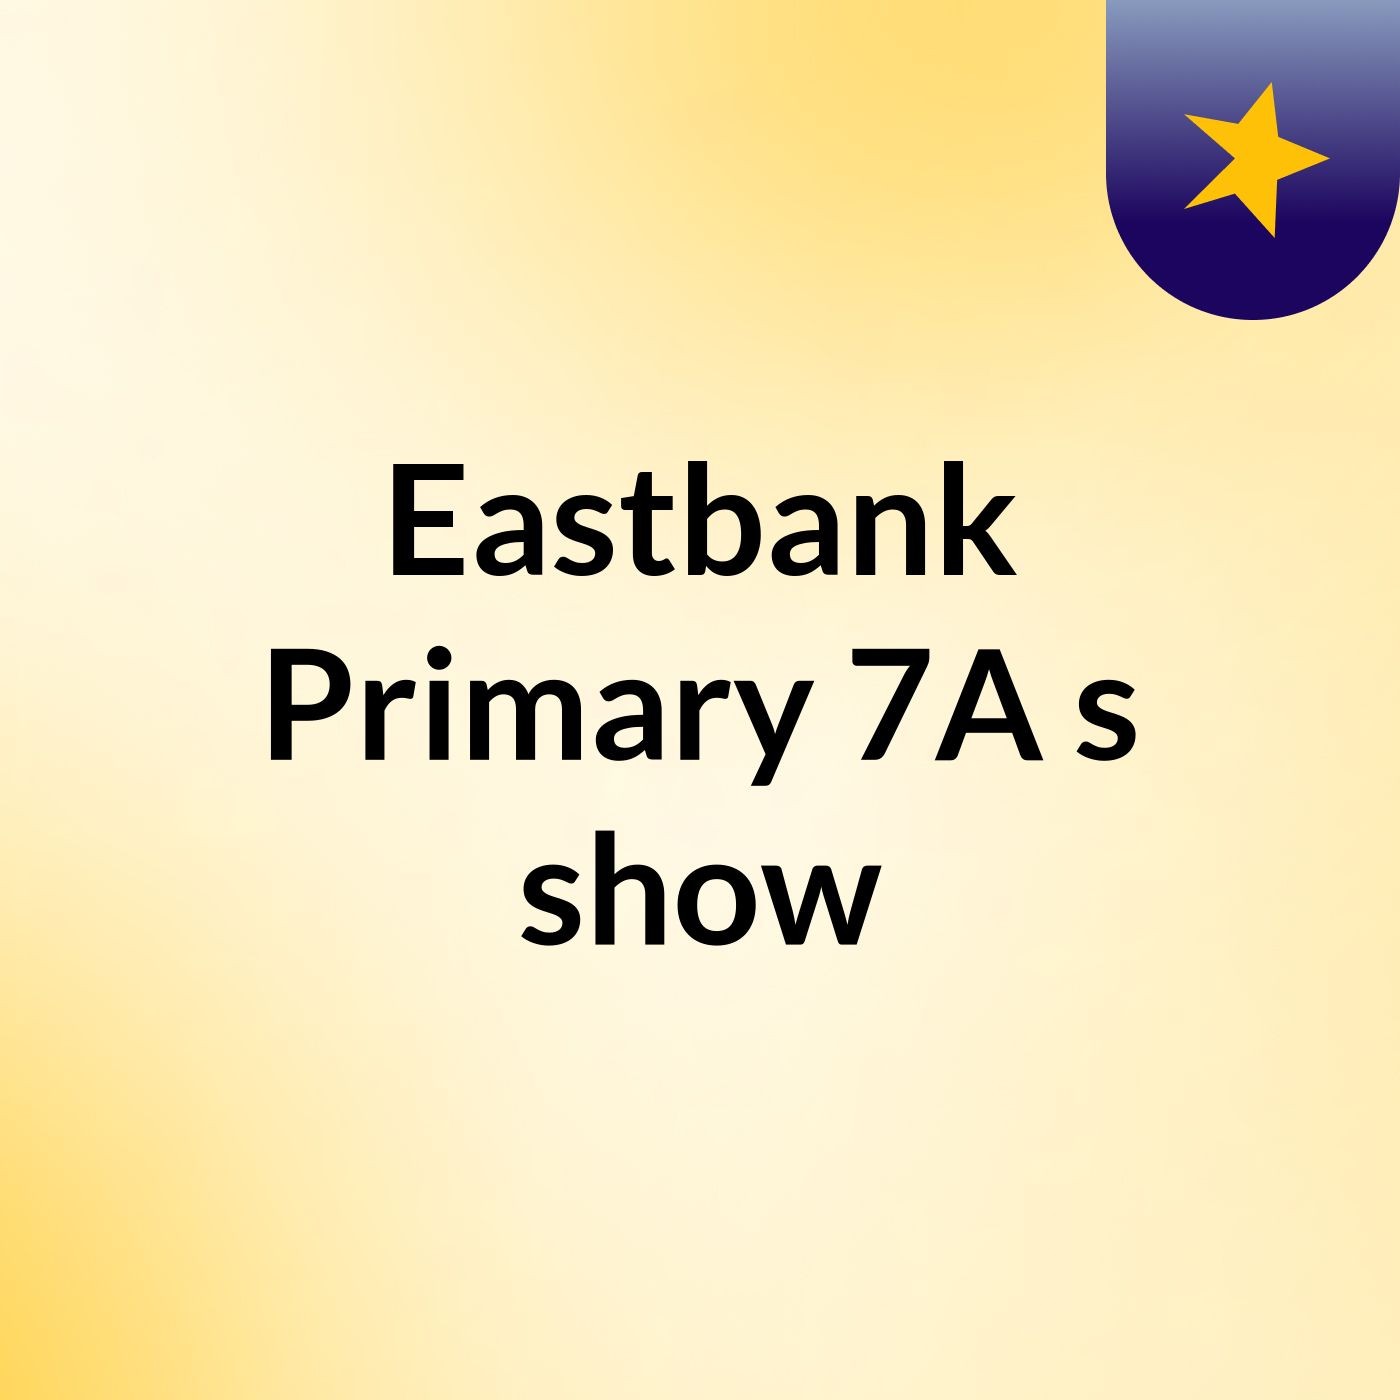 Eastbank Primary 7A's show